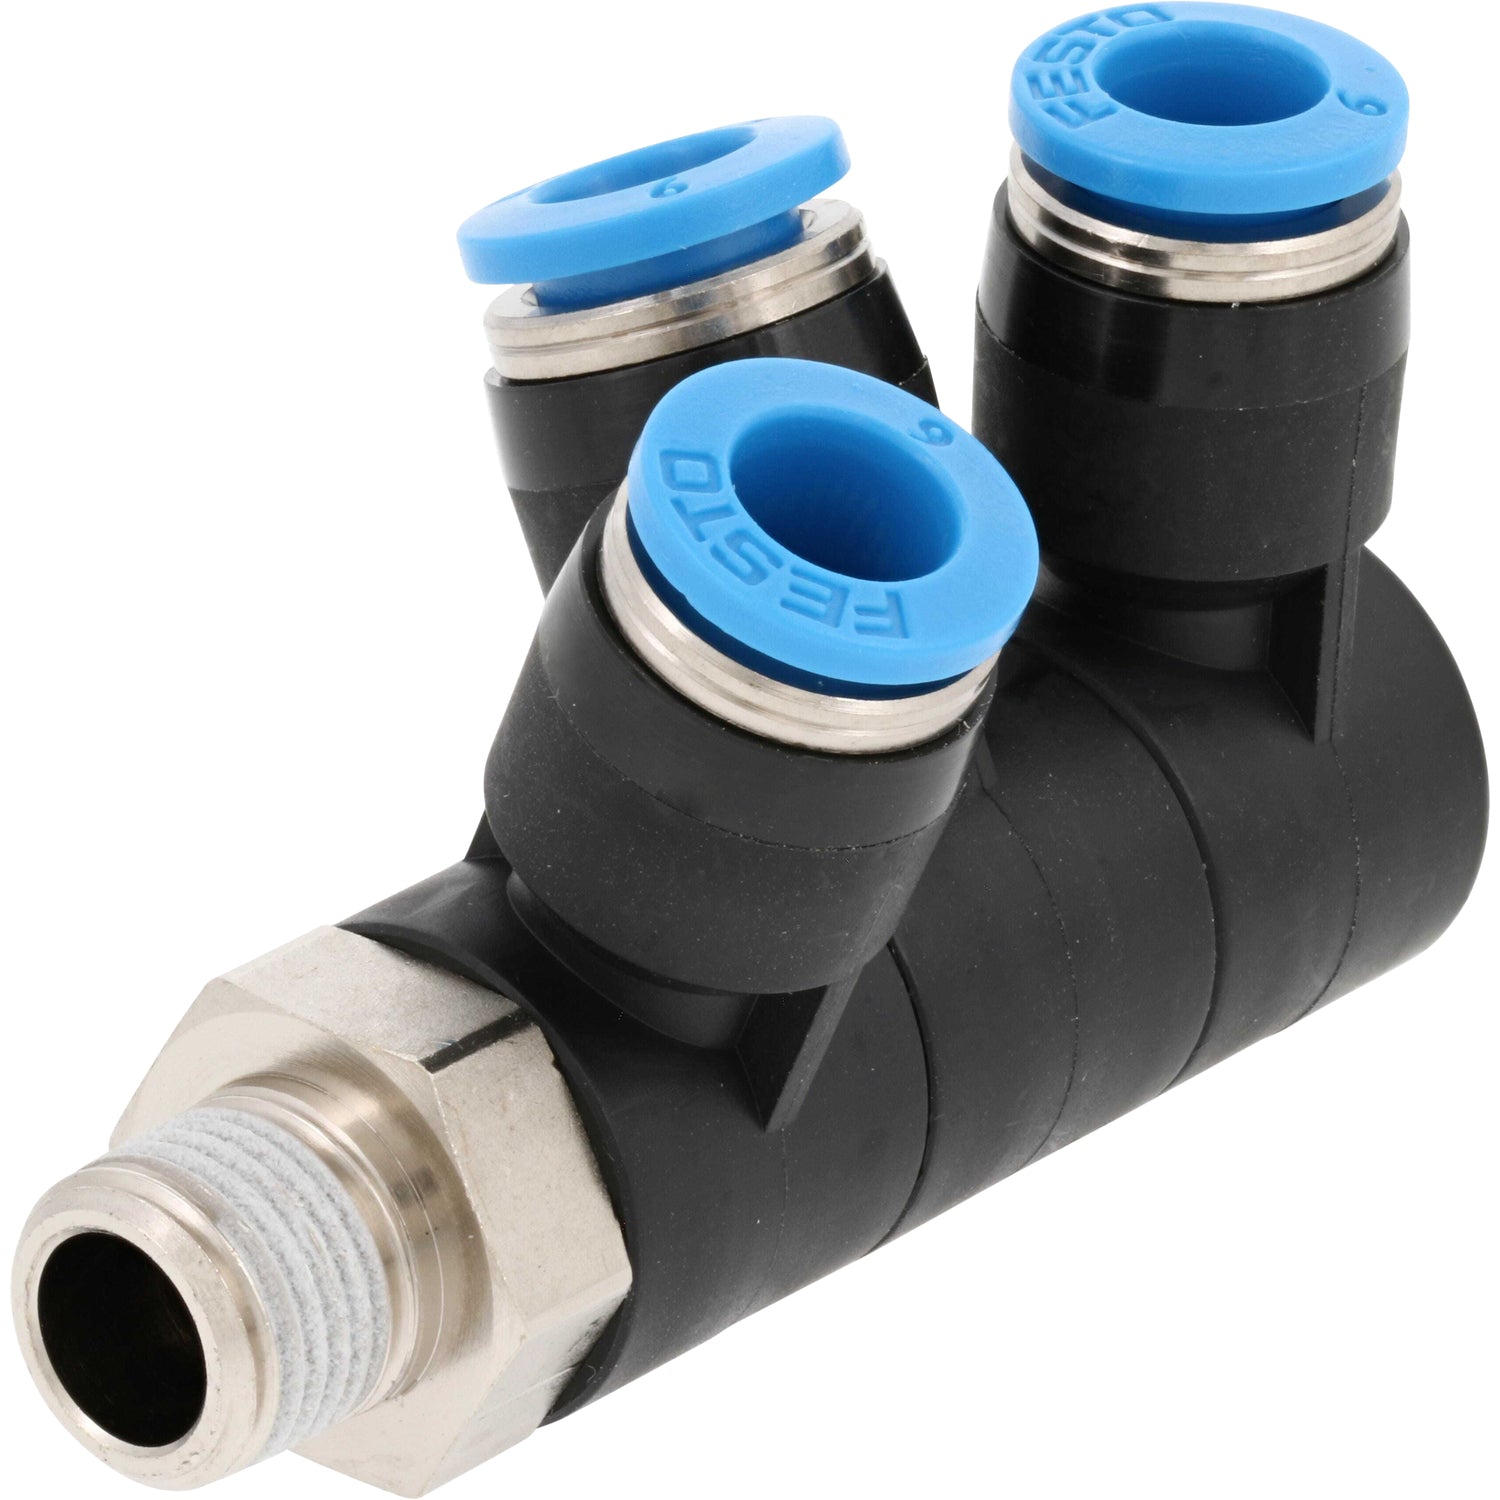 Black plastic multi distributor with nickel plated threads and blue plastic push collars. Part shown on white background. 